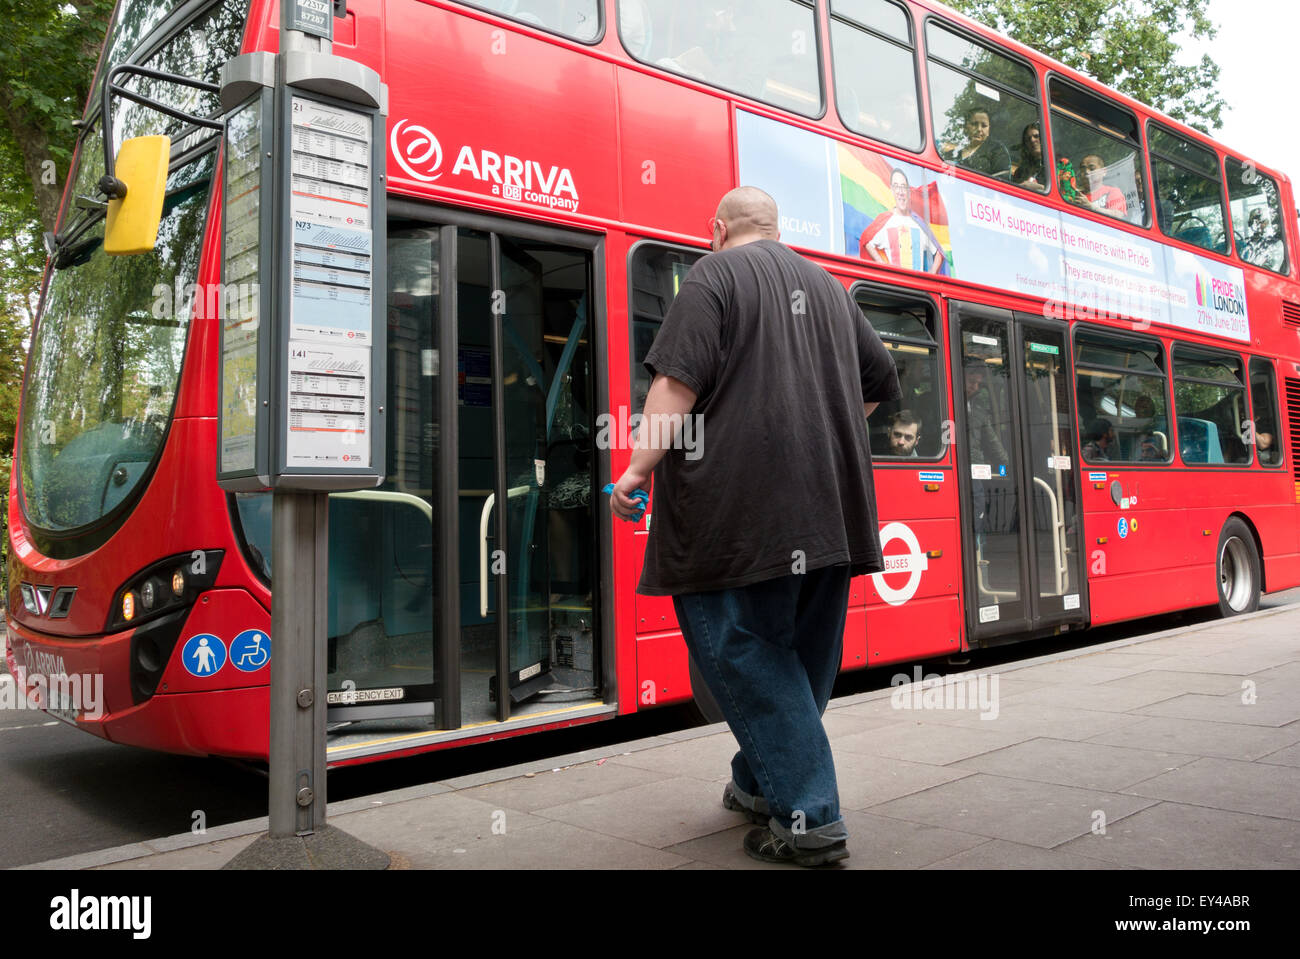 Obese man boarding a london bus at a bus stop, London, England UK Stock Photo